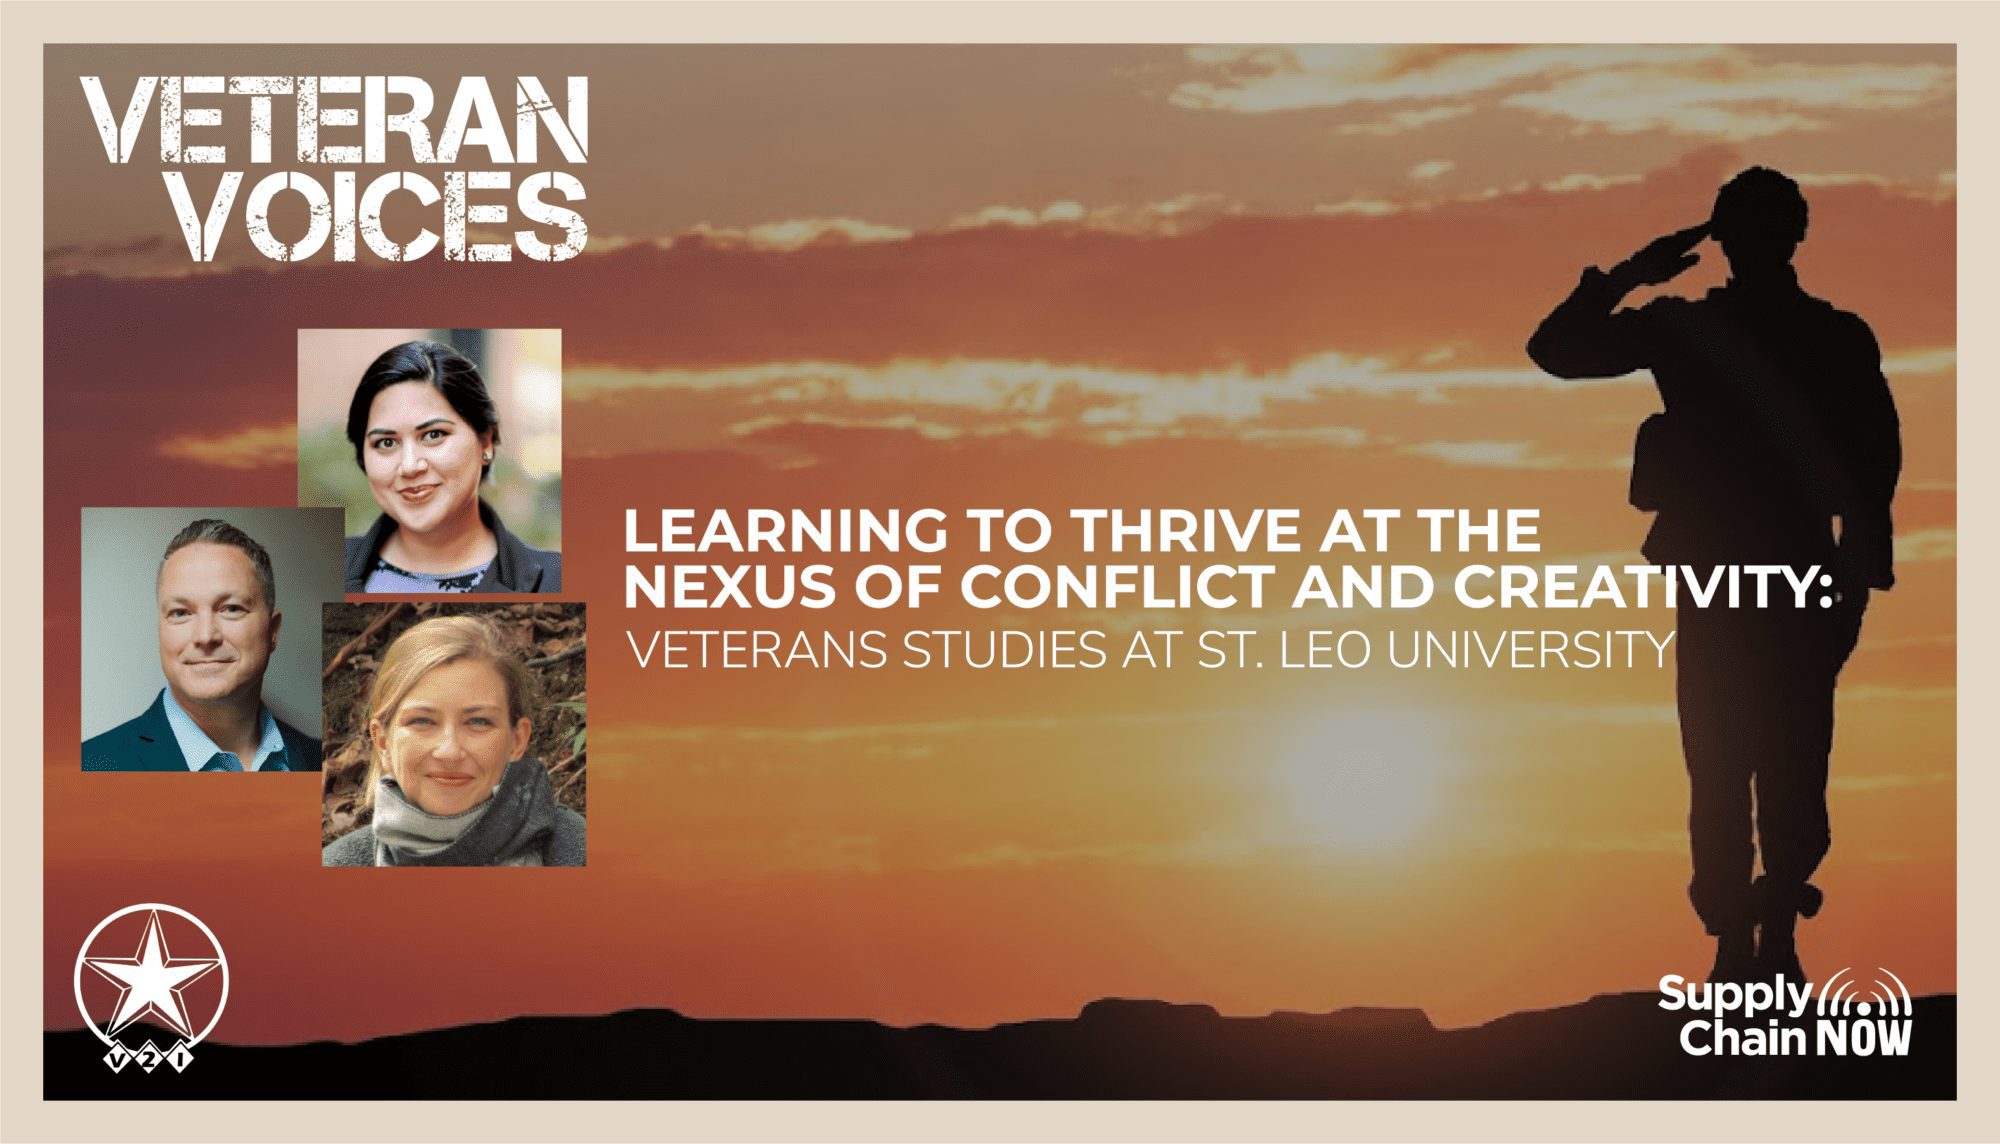 Veterans Studies at St Leo University: Learning to Thrive at The Nexus of Conflict and Creativity